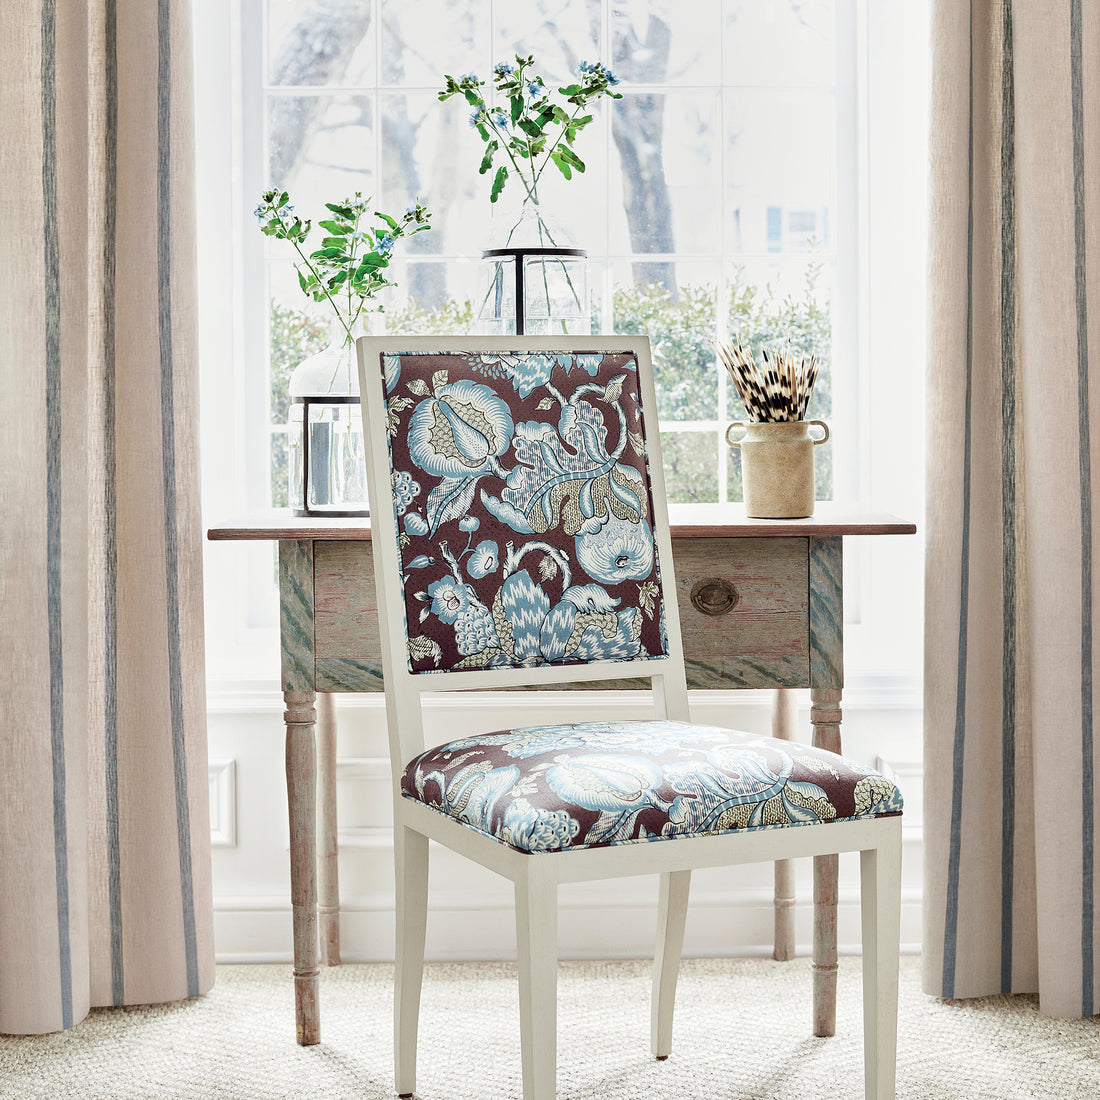 Lauderdale Dining Chair in Westmont printed fabric in brown and slate color - pattern number AF15110 - by Anna French in the Antilles collection